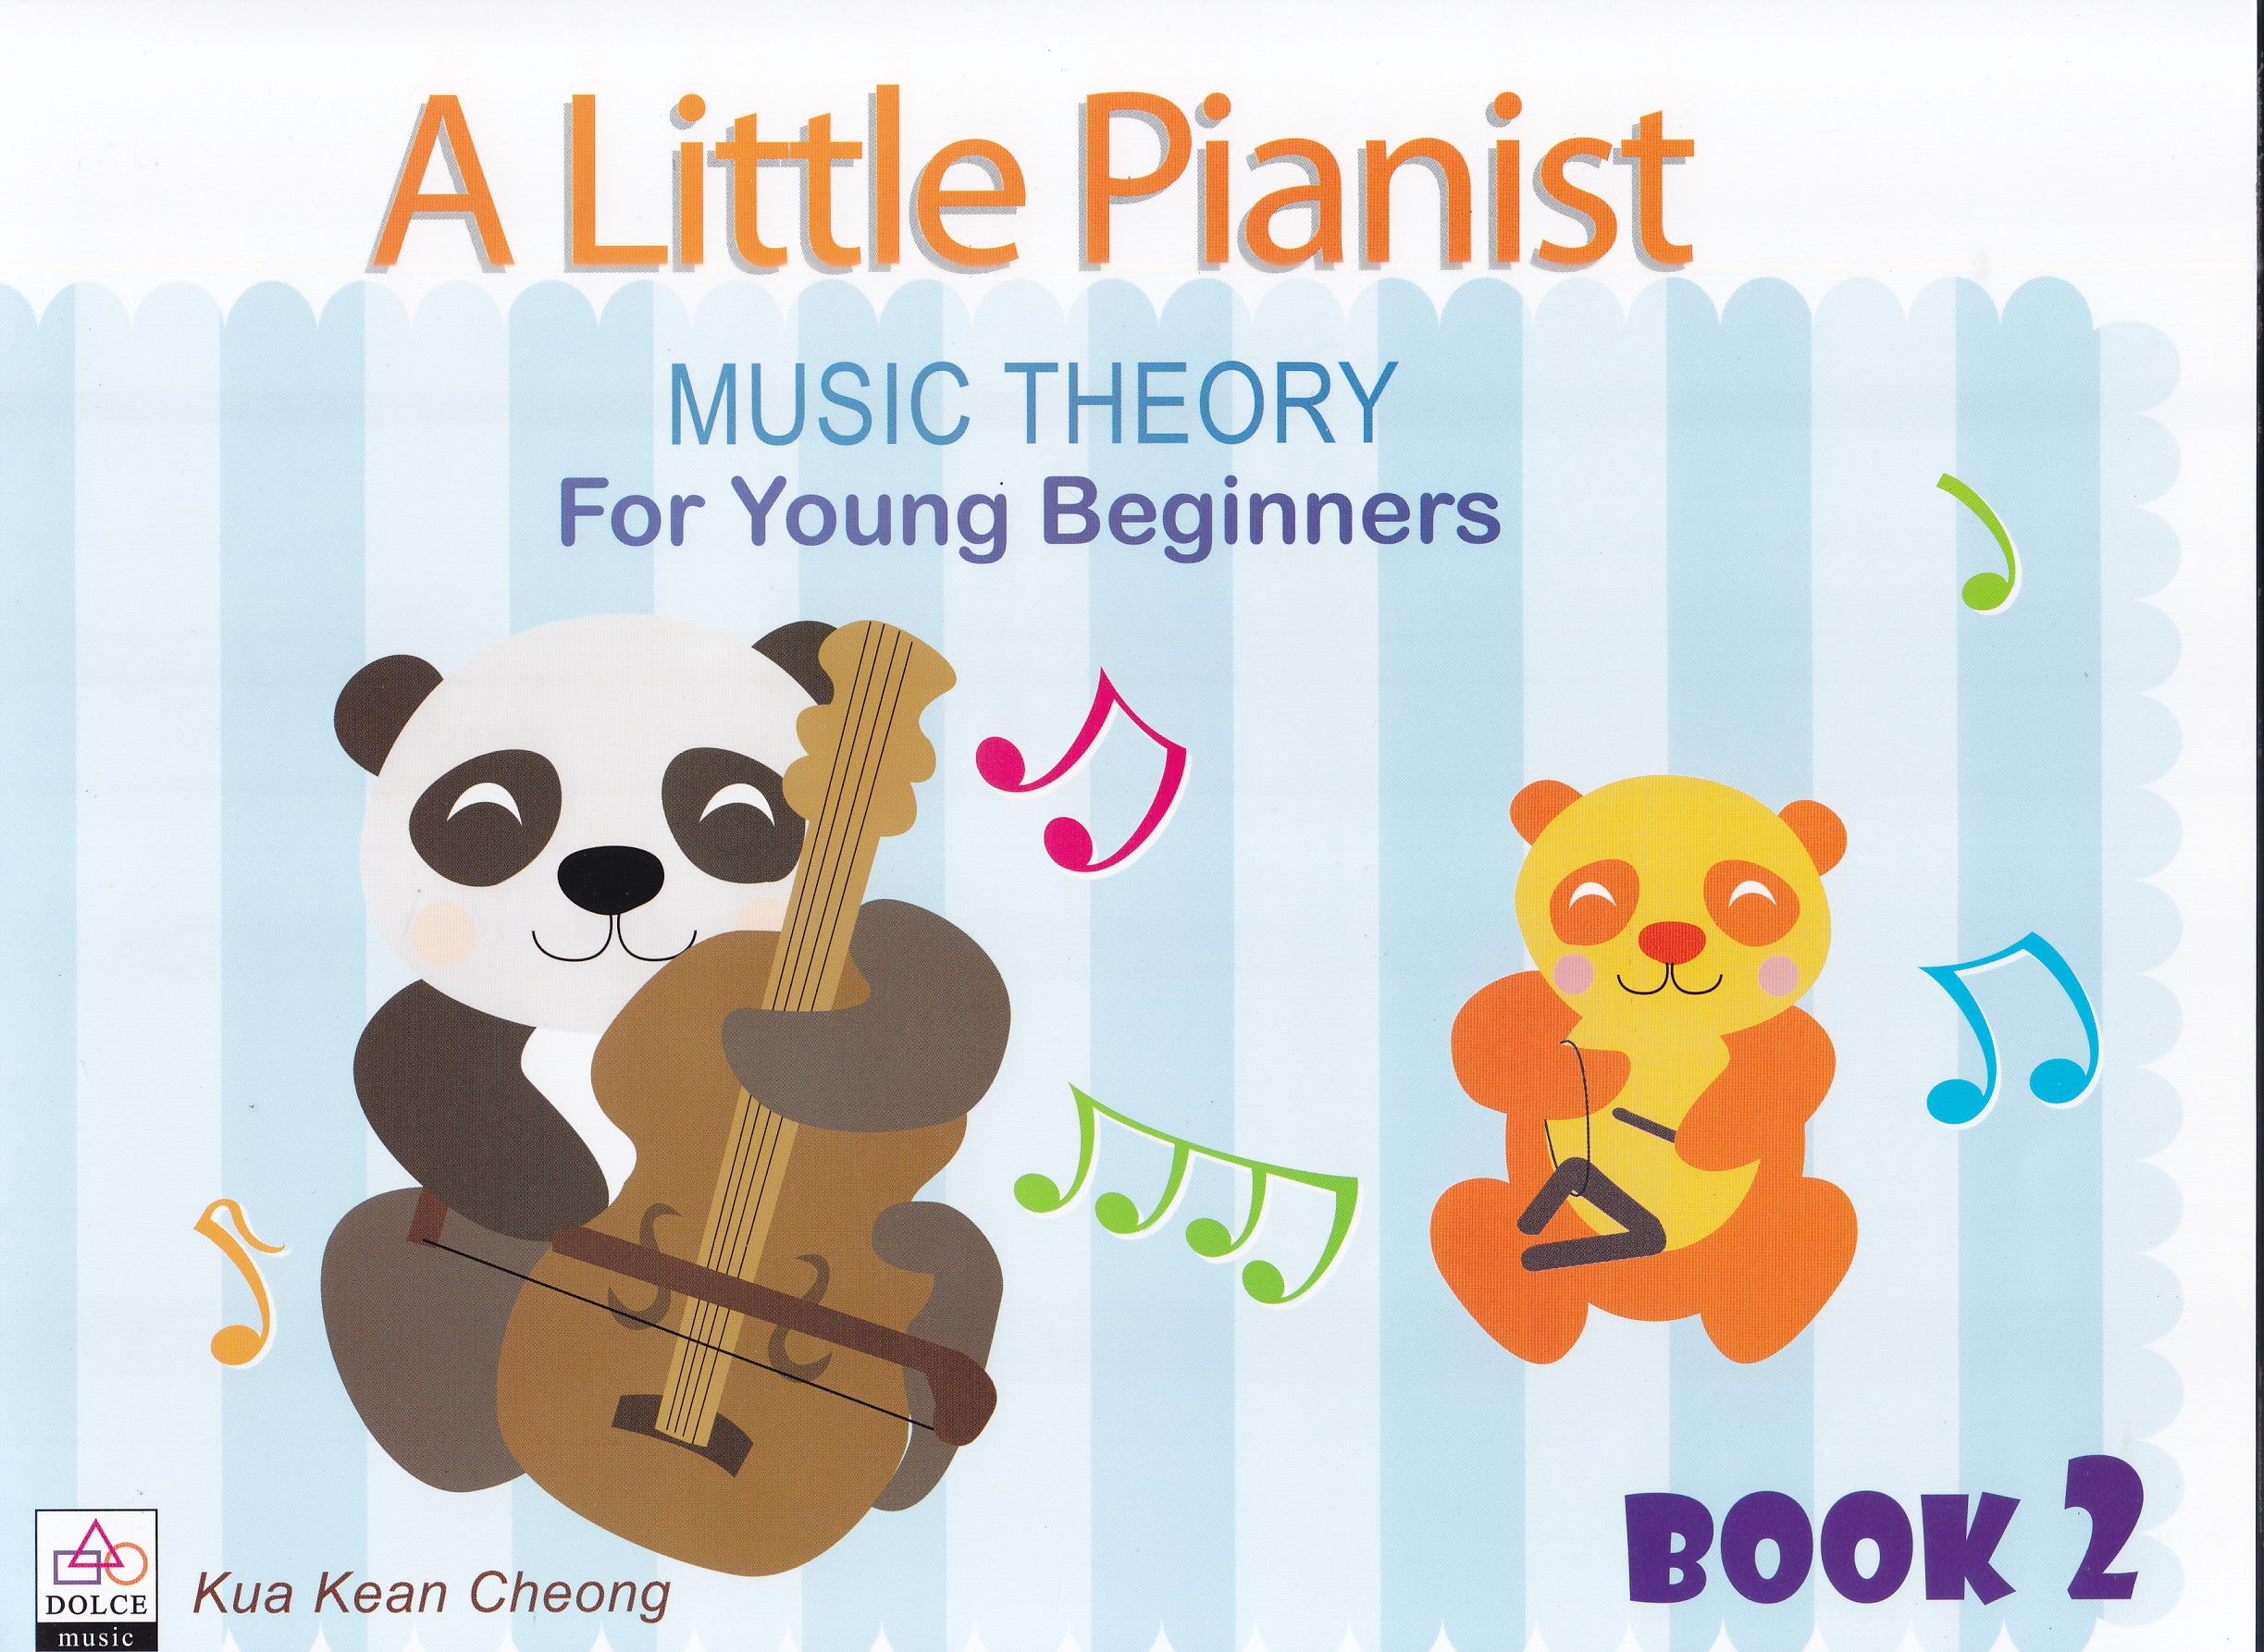 A-Little-Pianist-Music-Theory-For-Young-Beginners-Book-2